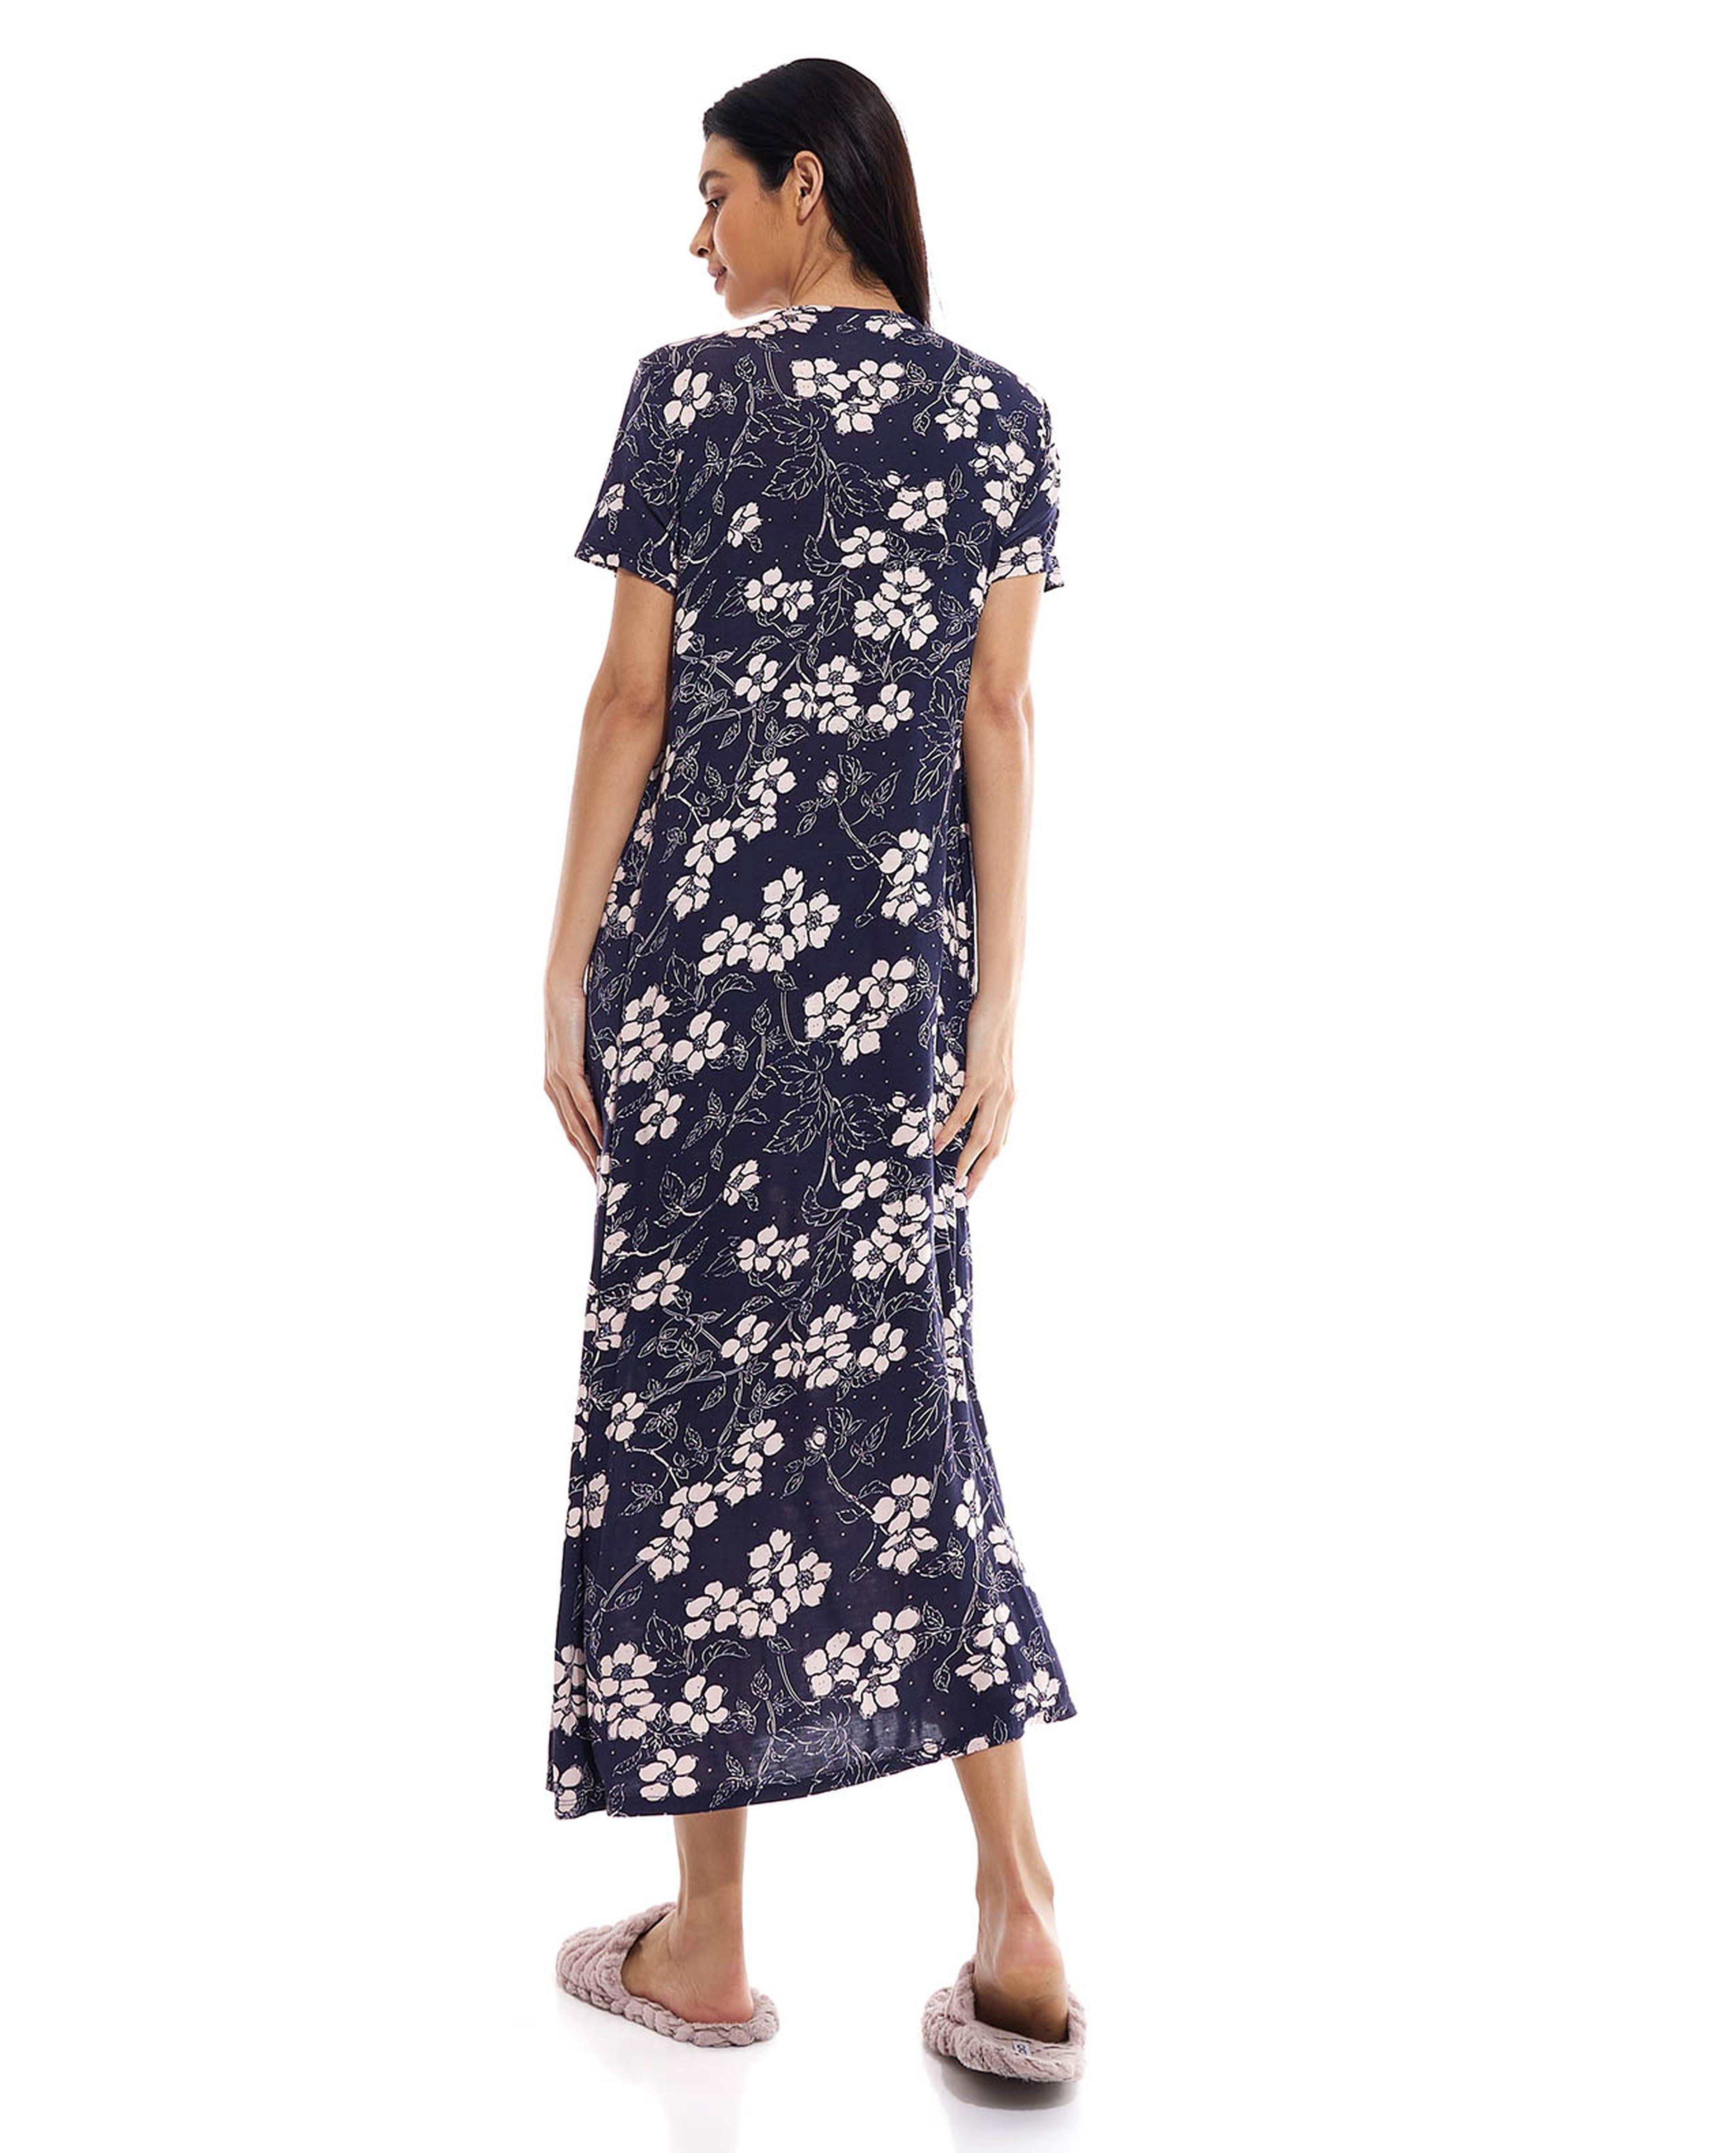 Floral Print Nightgown with V-Neck and Short Sleeves